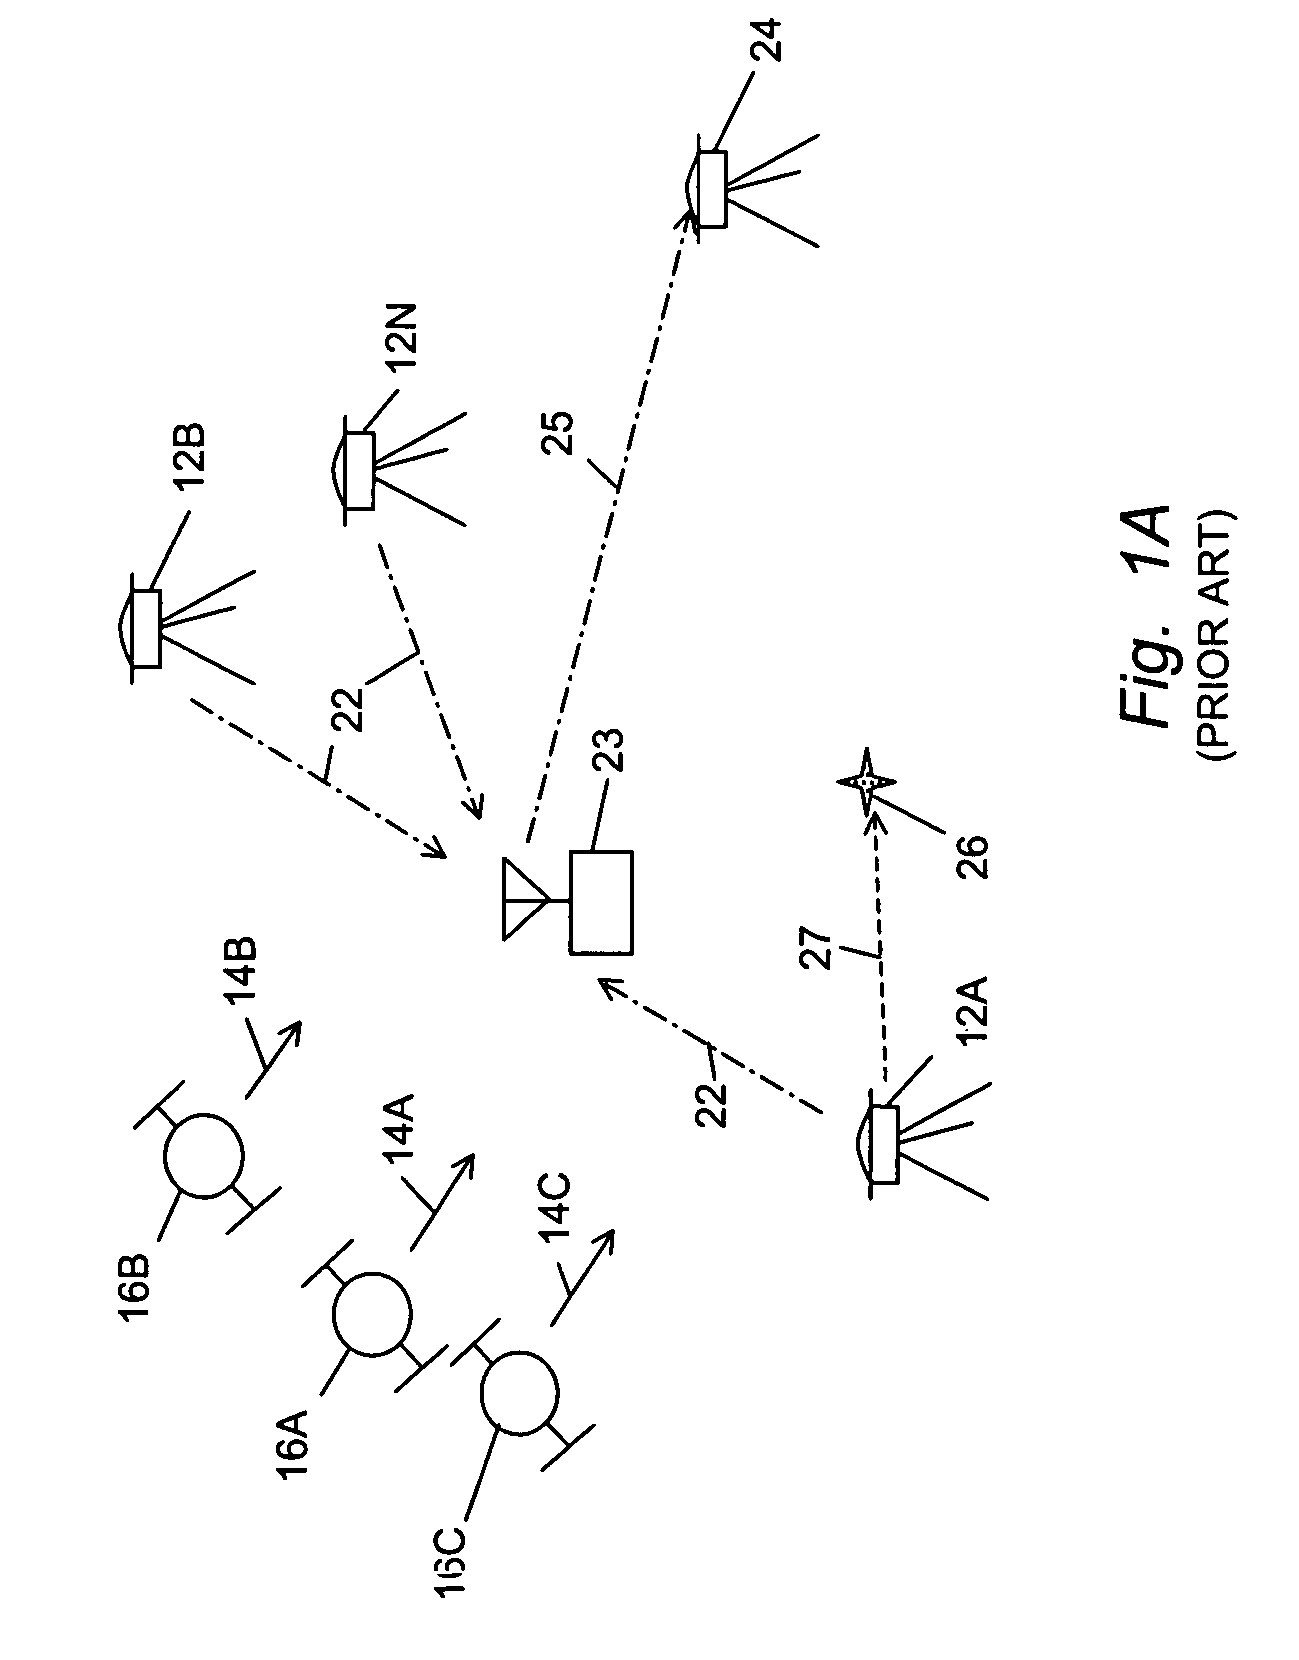 GPS reference system providing synthetic reference phases for controlling accuracy of high integrity positions